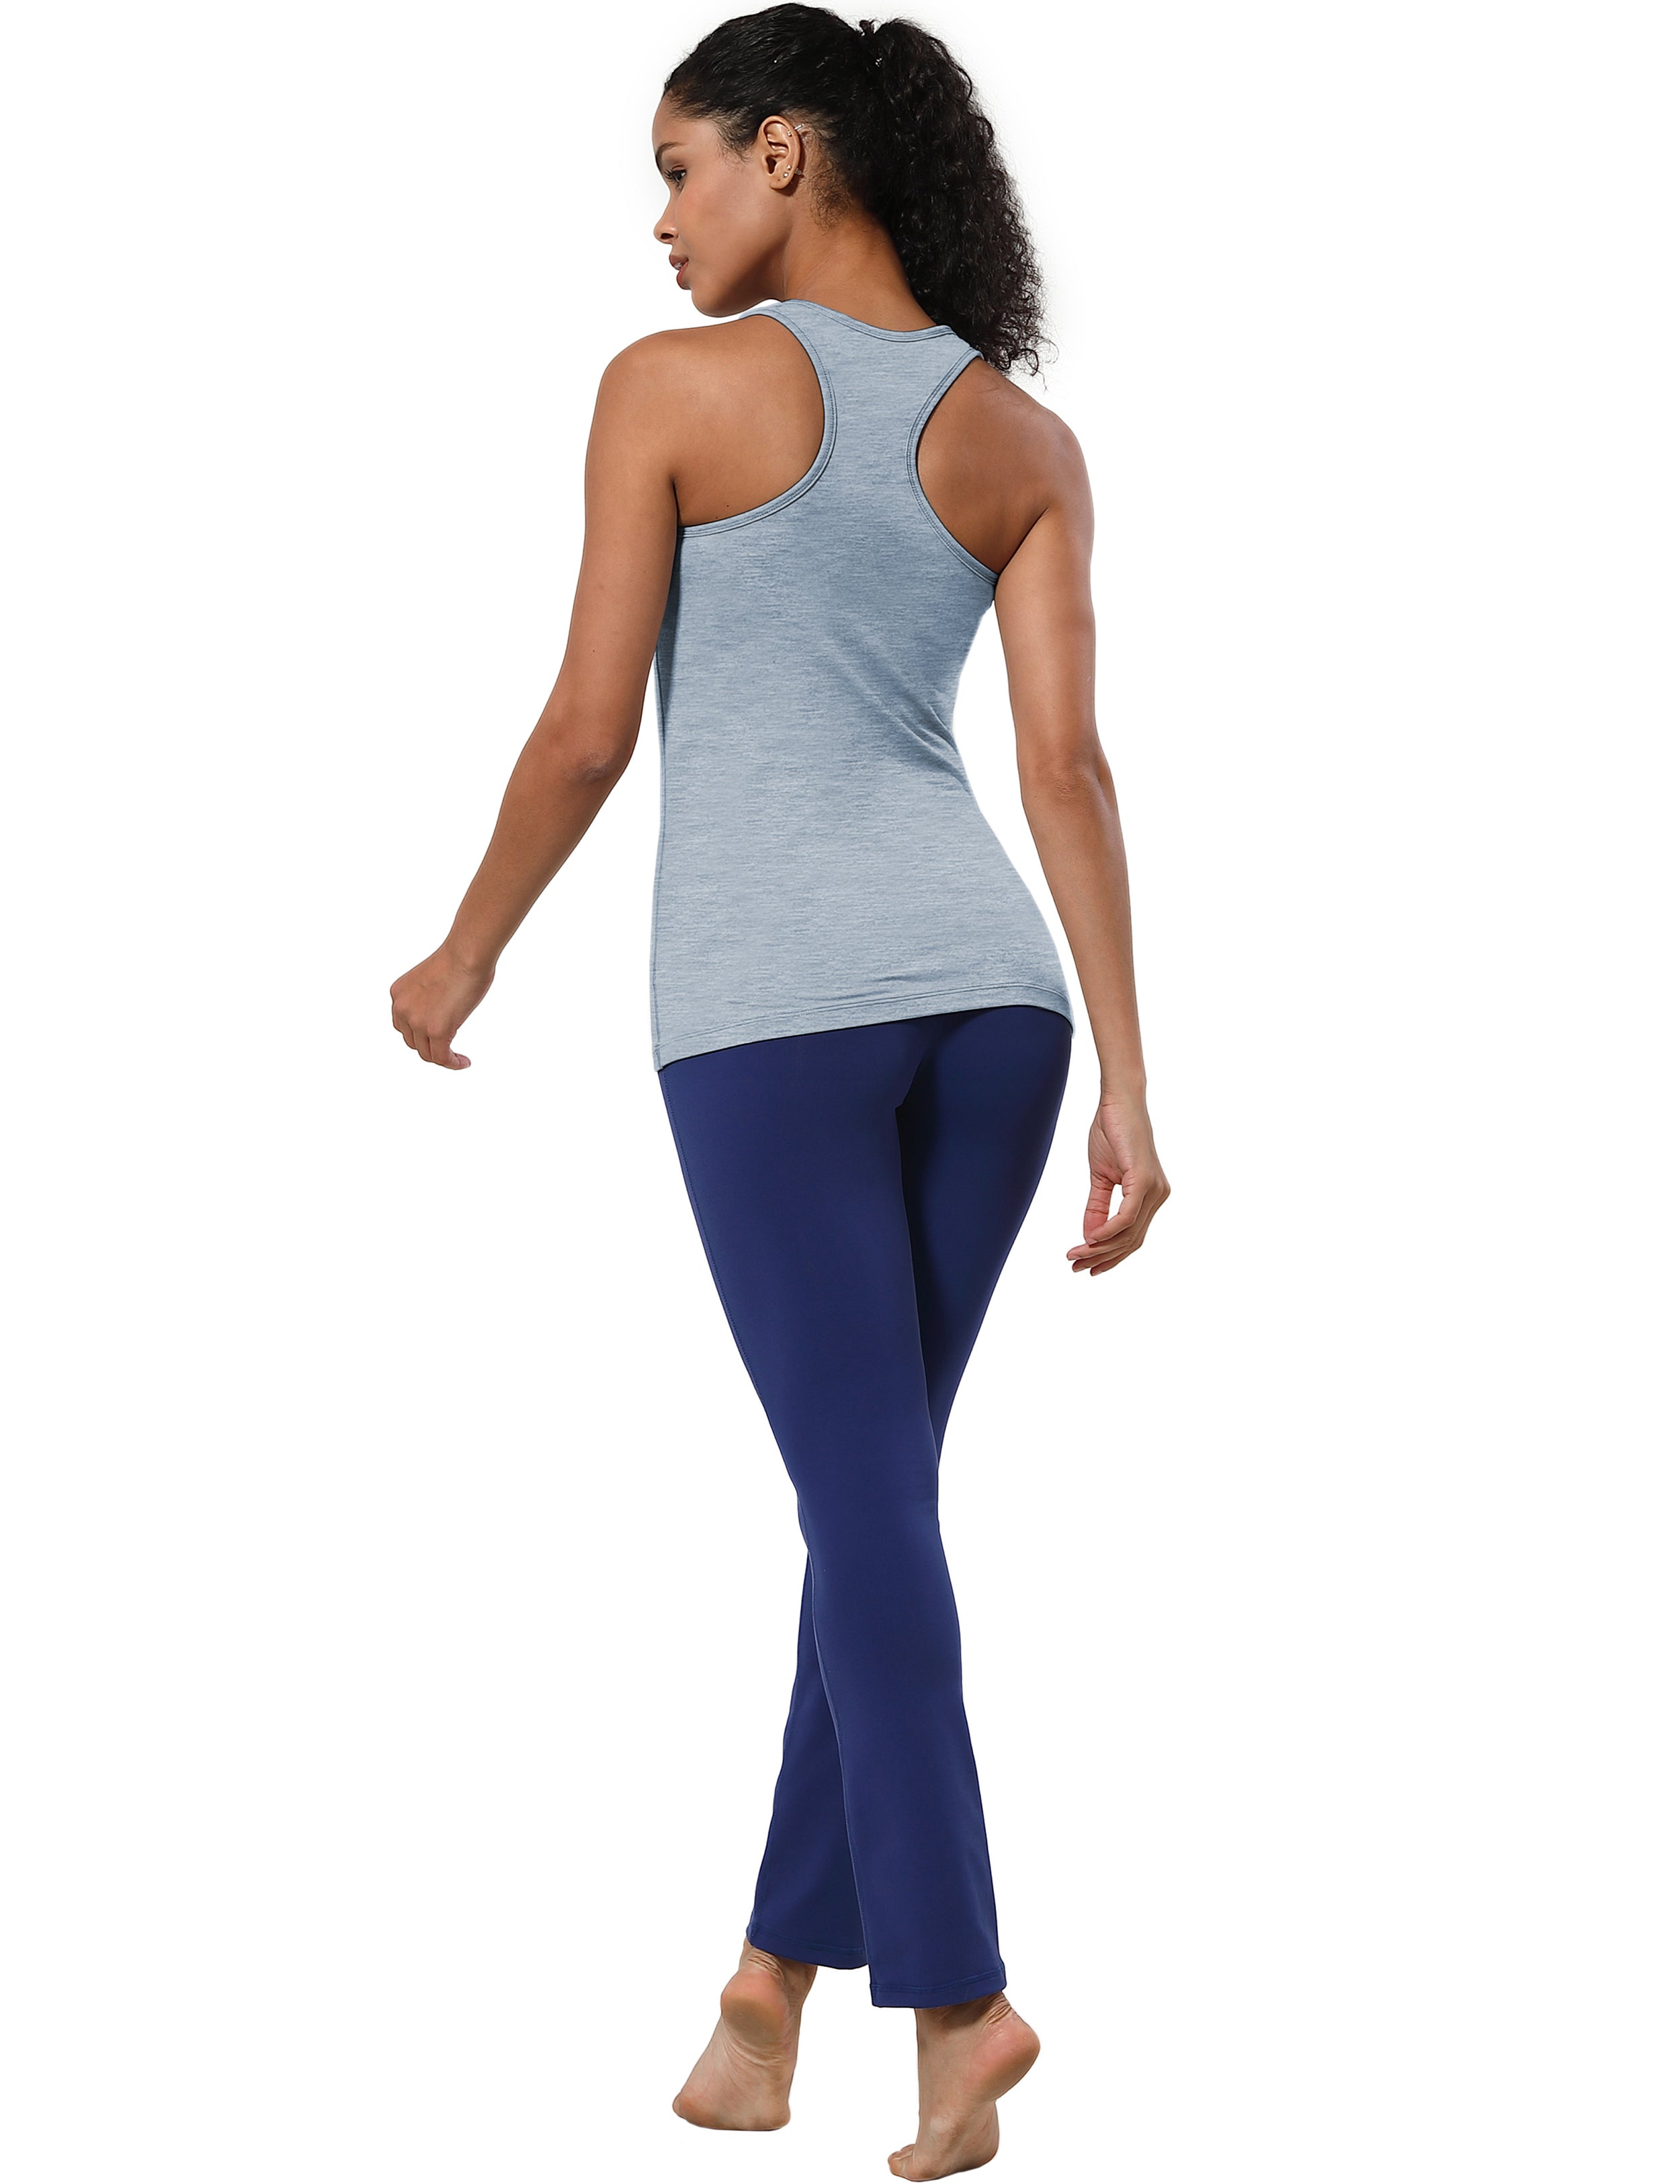 Racerback Athletic Tank Tops heatherblue 92%Nylon/8%Spandex(Cotton Soft) Designed for Tall Size Tight Fit So buttery soft, it feels weightless Sweat-wicking Four-way stretch Breathable Contours your body Sits below the waistband for moderate, everyday coverage